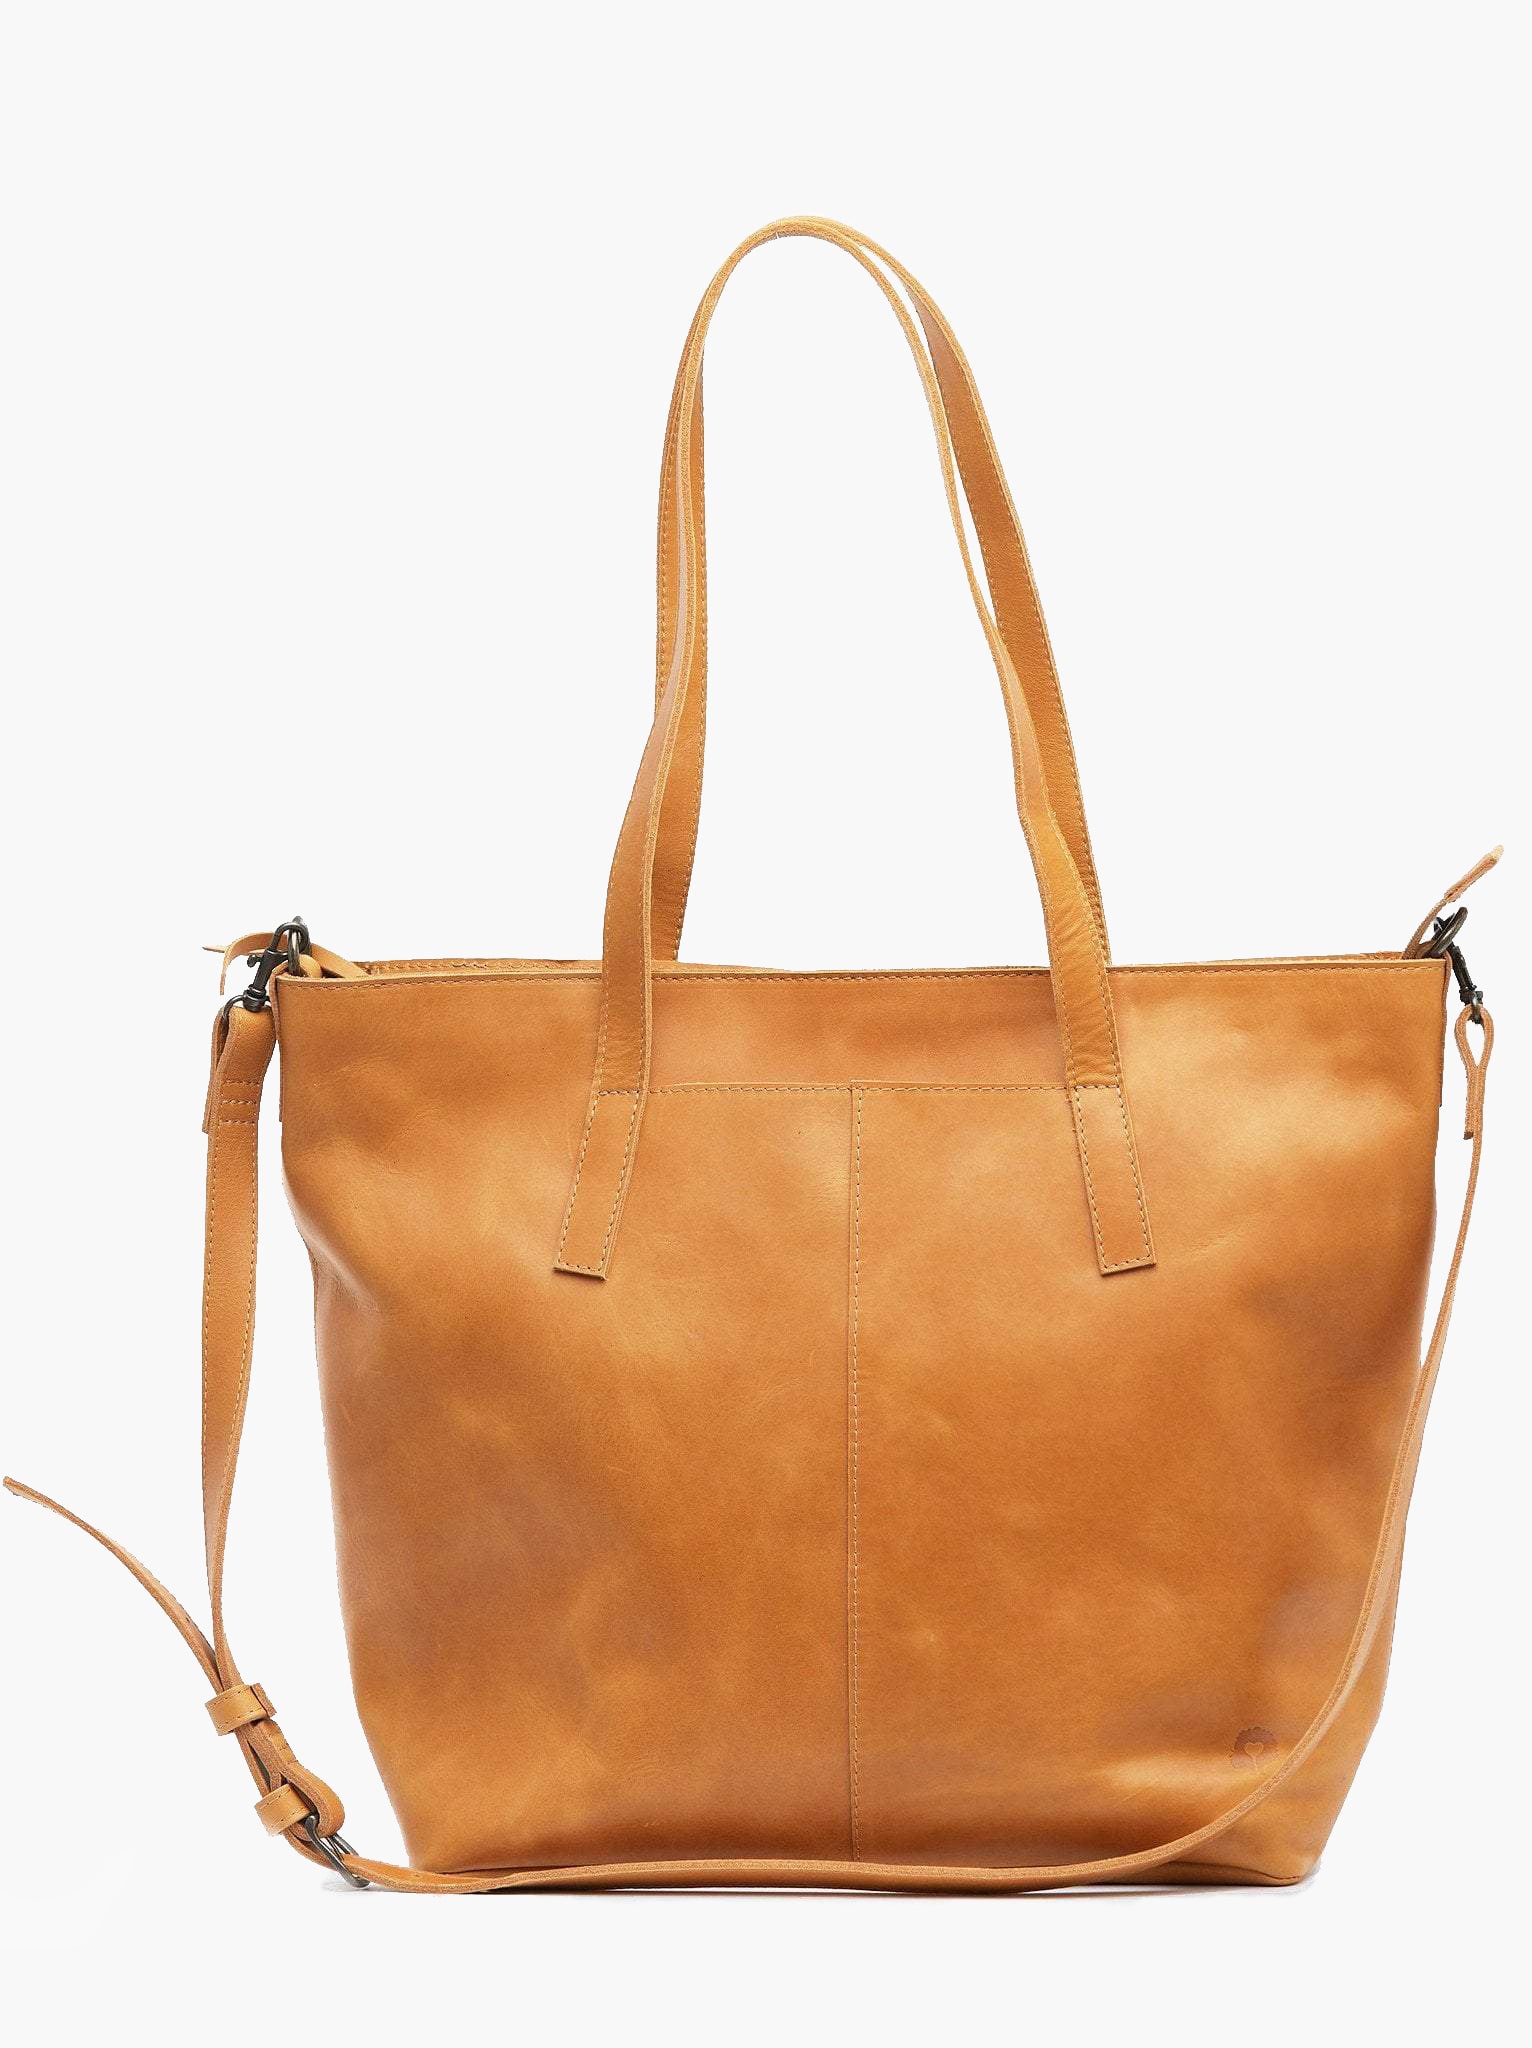 ABLE | Leather Bags, Women's Apparel, Jeans, Shoes & Handmade Jewelry